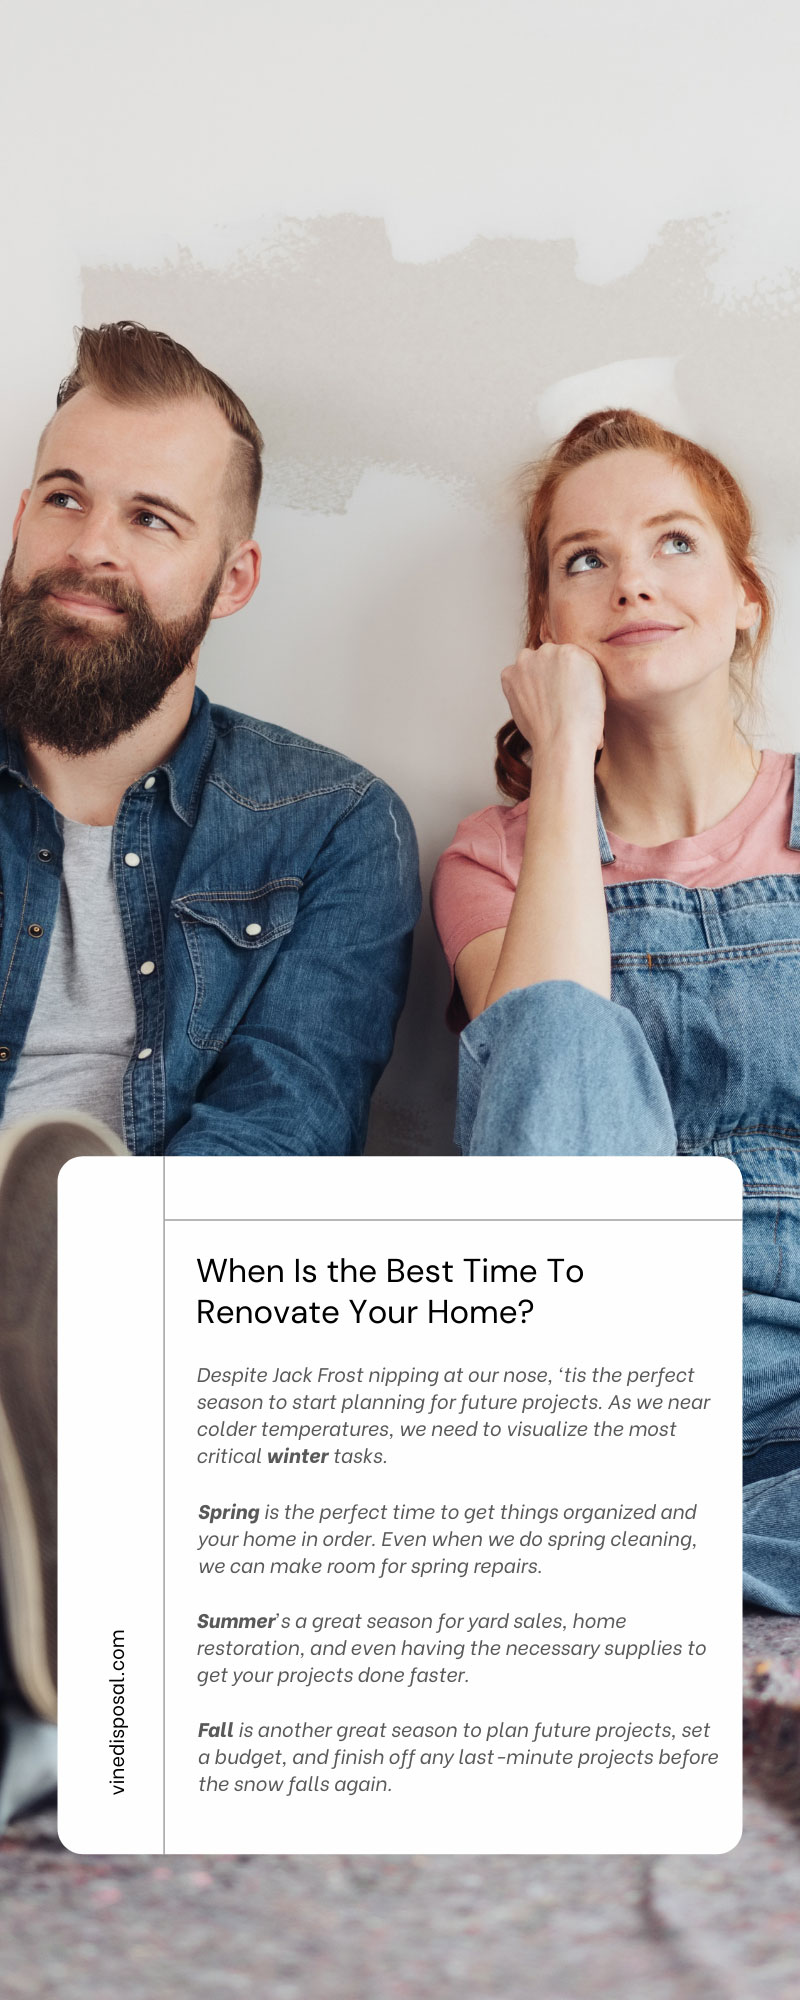 When Is the Best Time To Renovate Your Home?